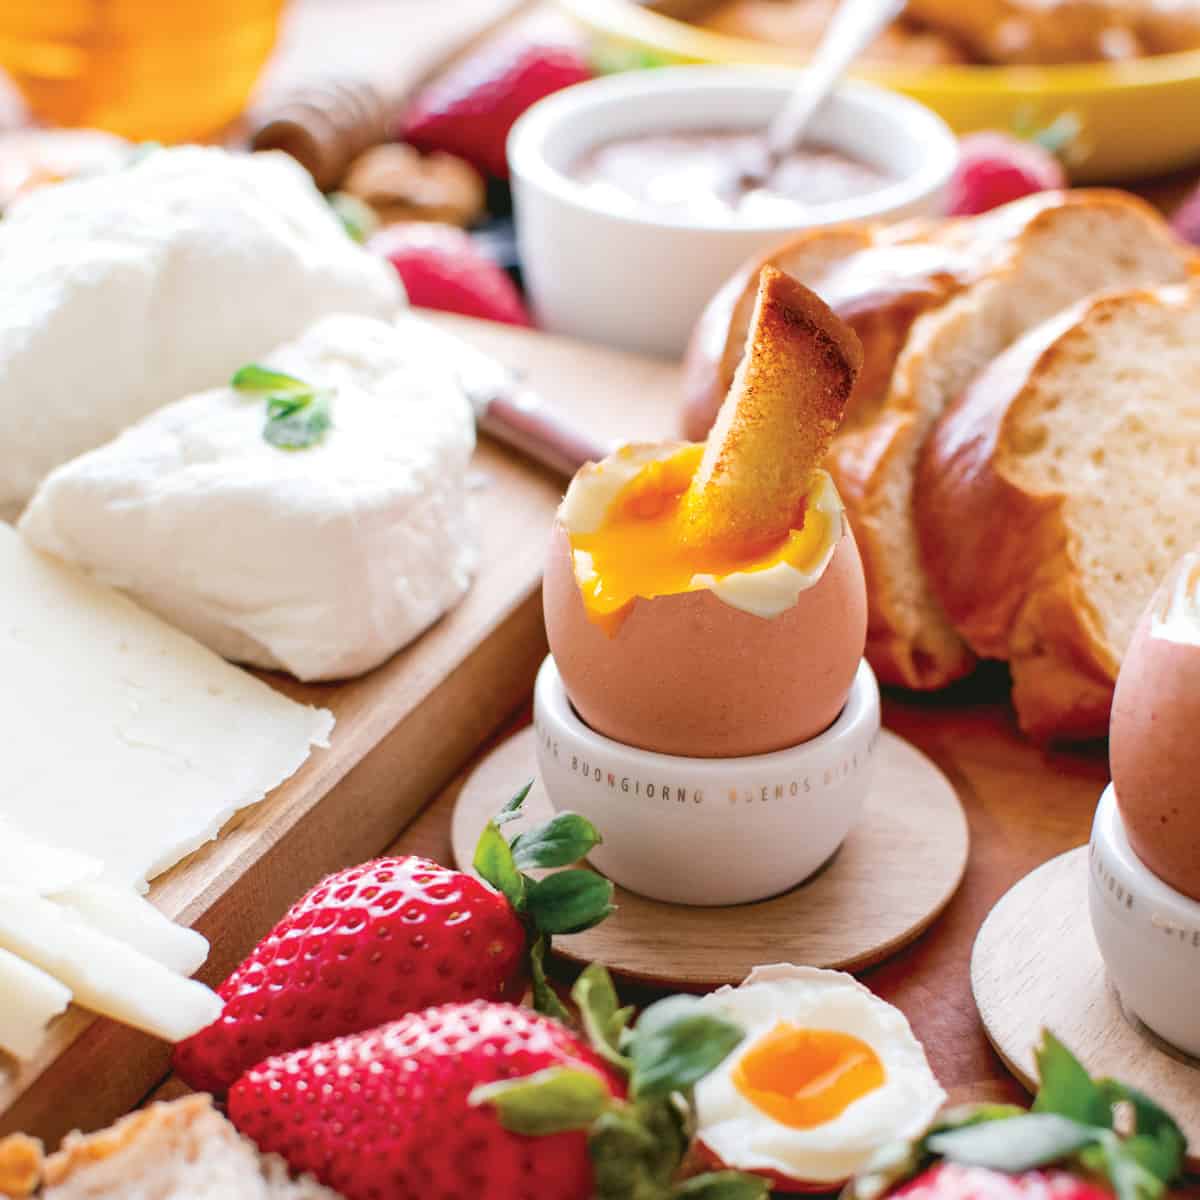 A soft boiled egg in an egg cup, broken on top with a slice of bread in the yolk, surrounded by cheese, strawberries and breads.